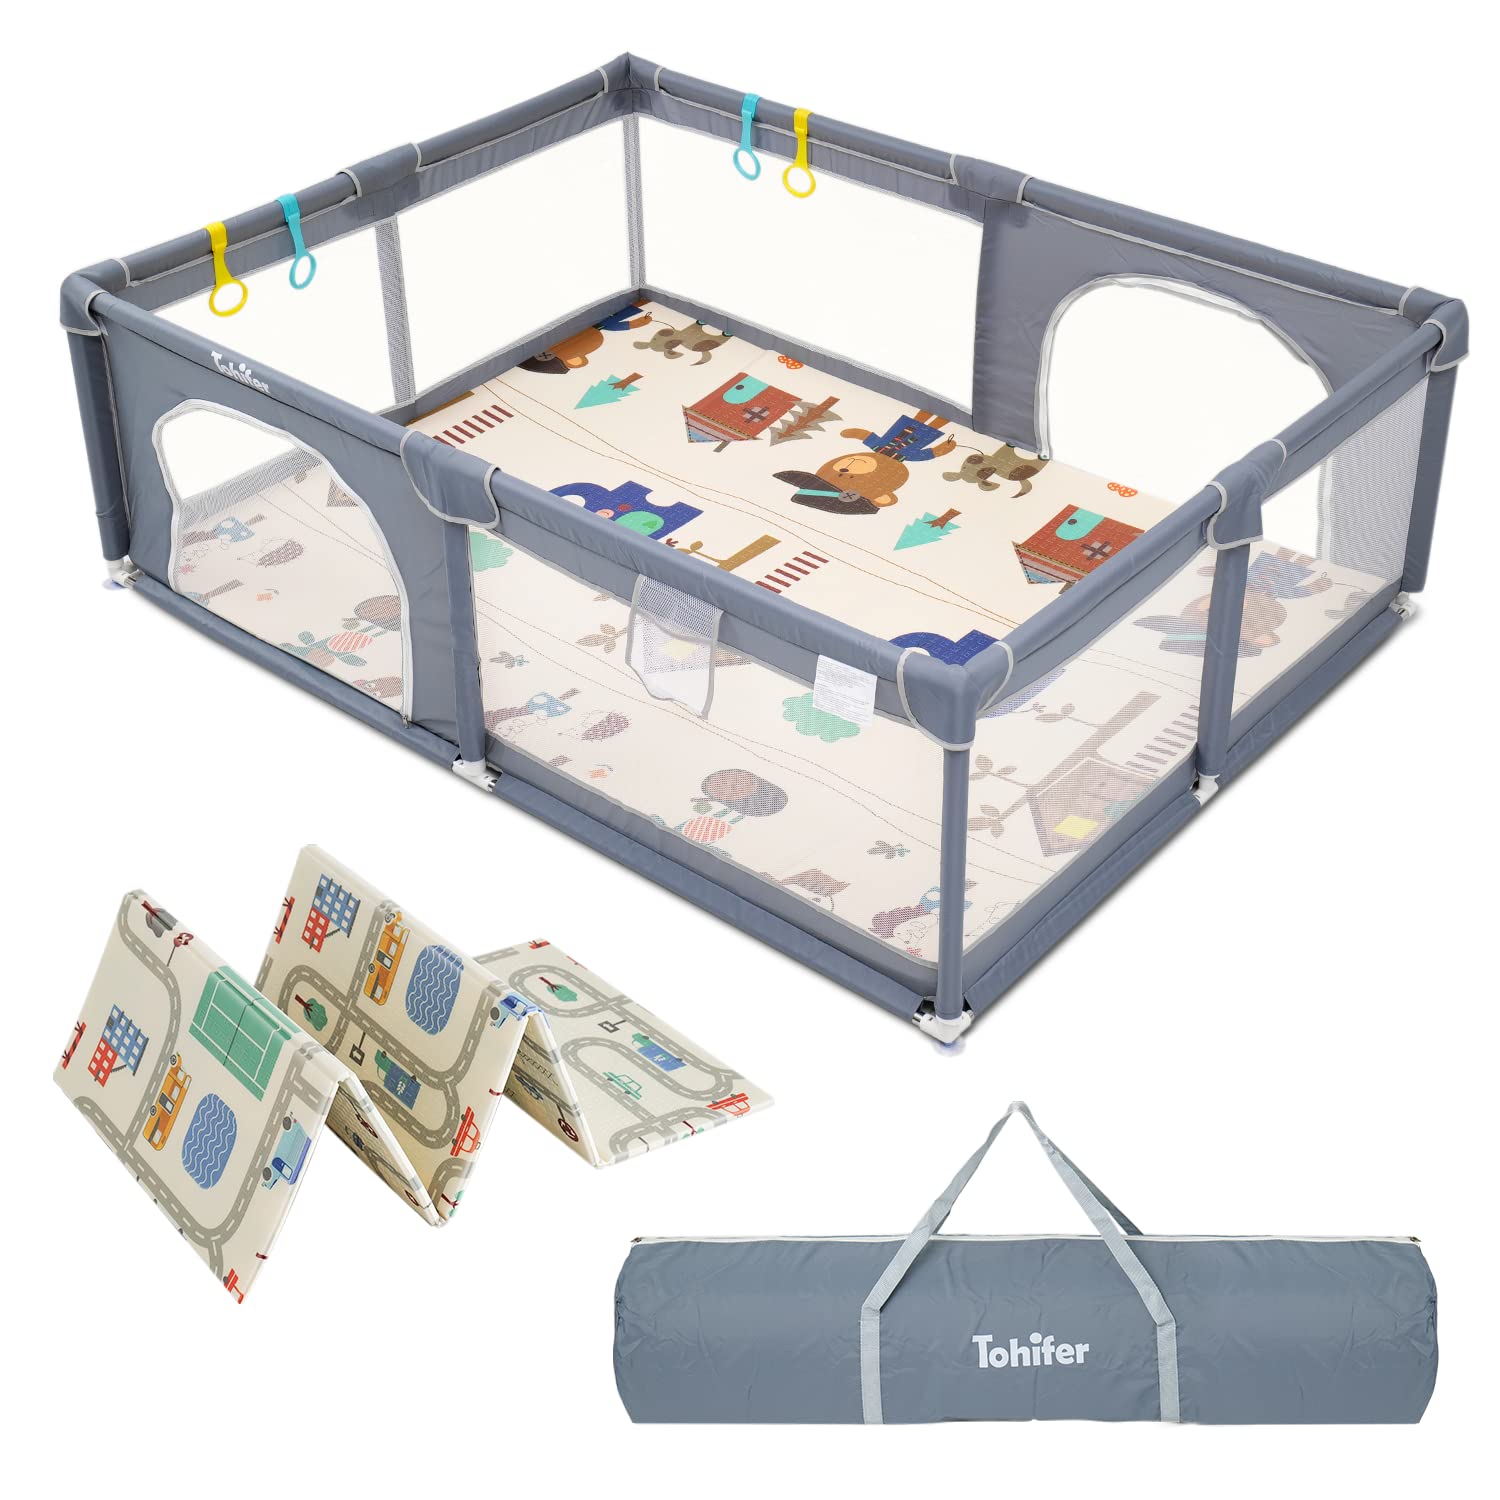 Baby Playpen with Mat, Large Baby Play Yard for Toddler, BPA-Free, Non-Toxic, Safe No Gaps Playards for Babies, Indoor & Outdoor Extra Large Kids Activity Center 79